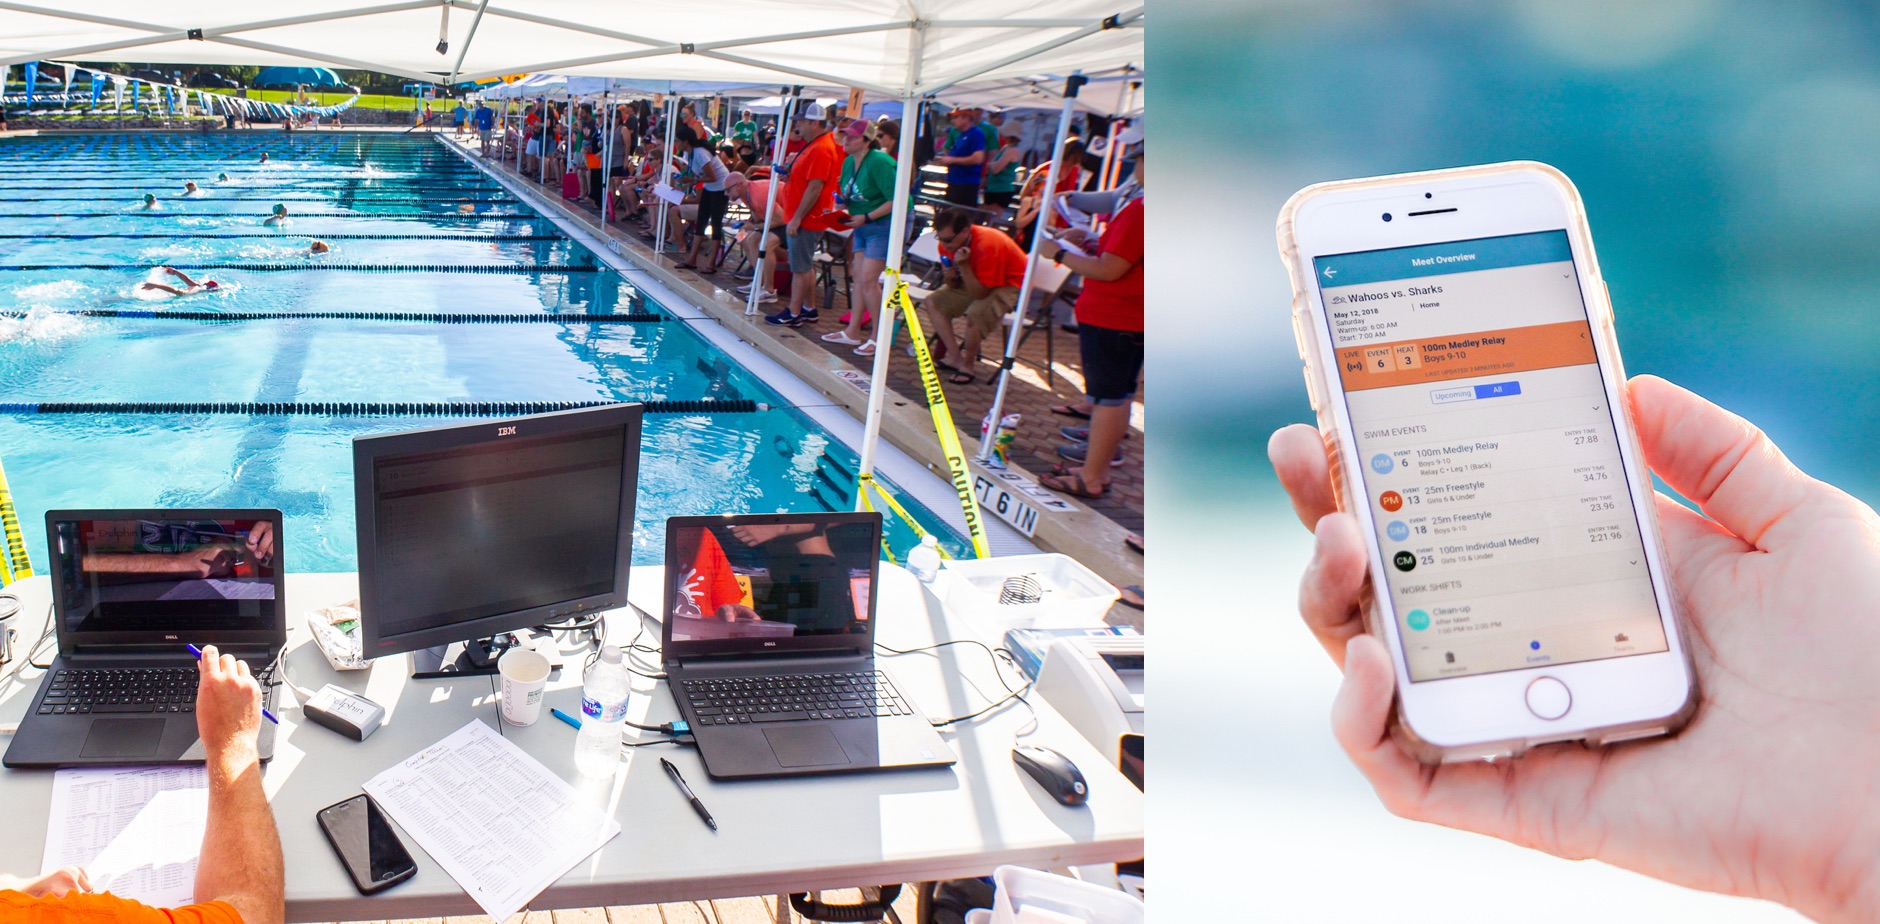 Two photos, of a swim meet with laptops, and a phone showing results from a swim meet